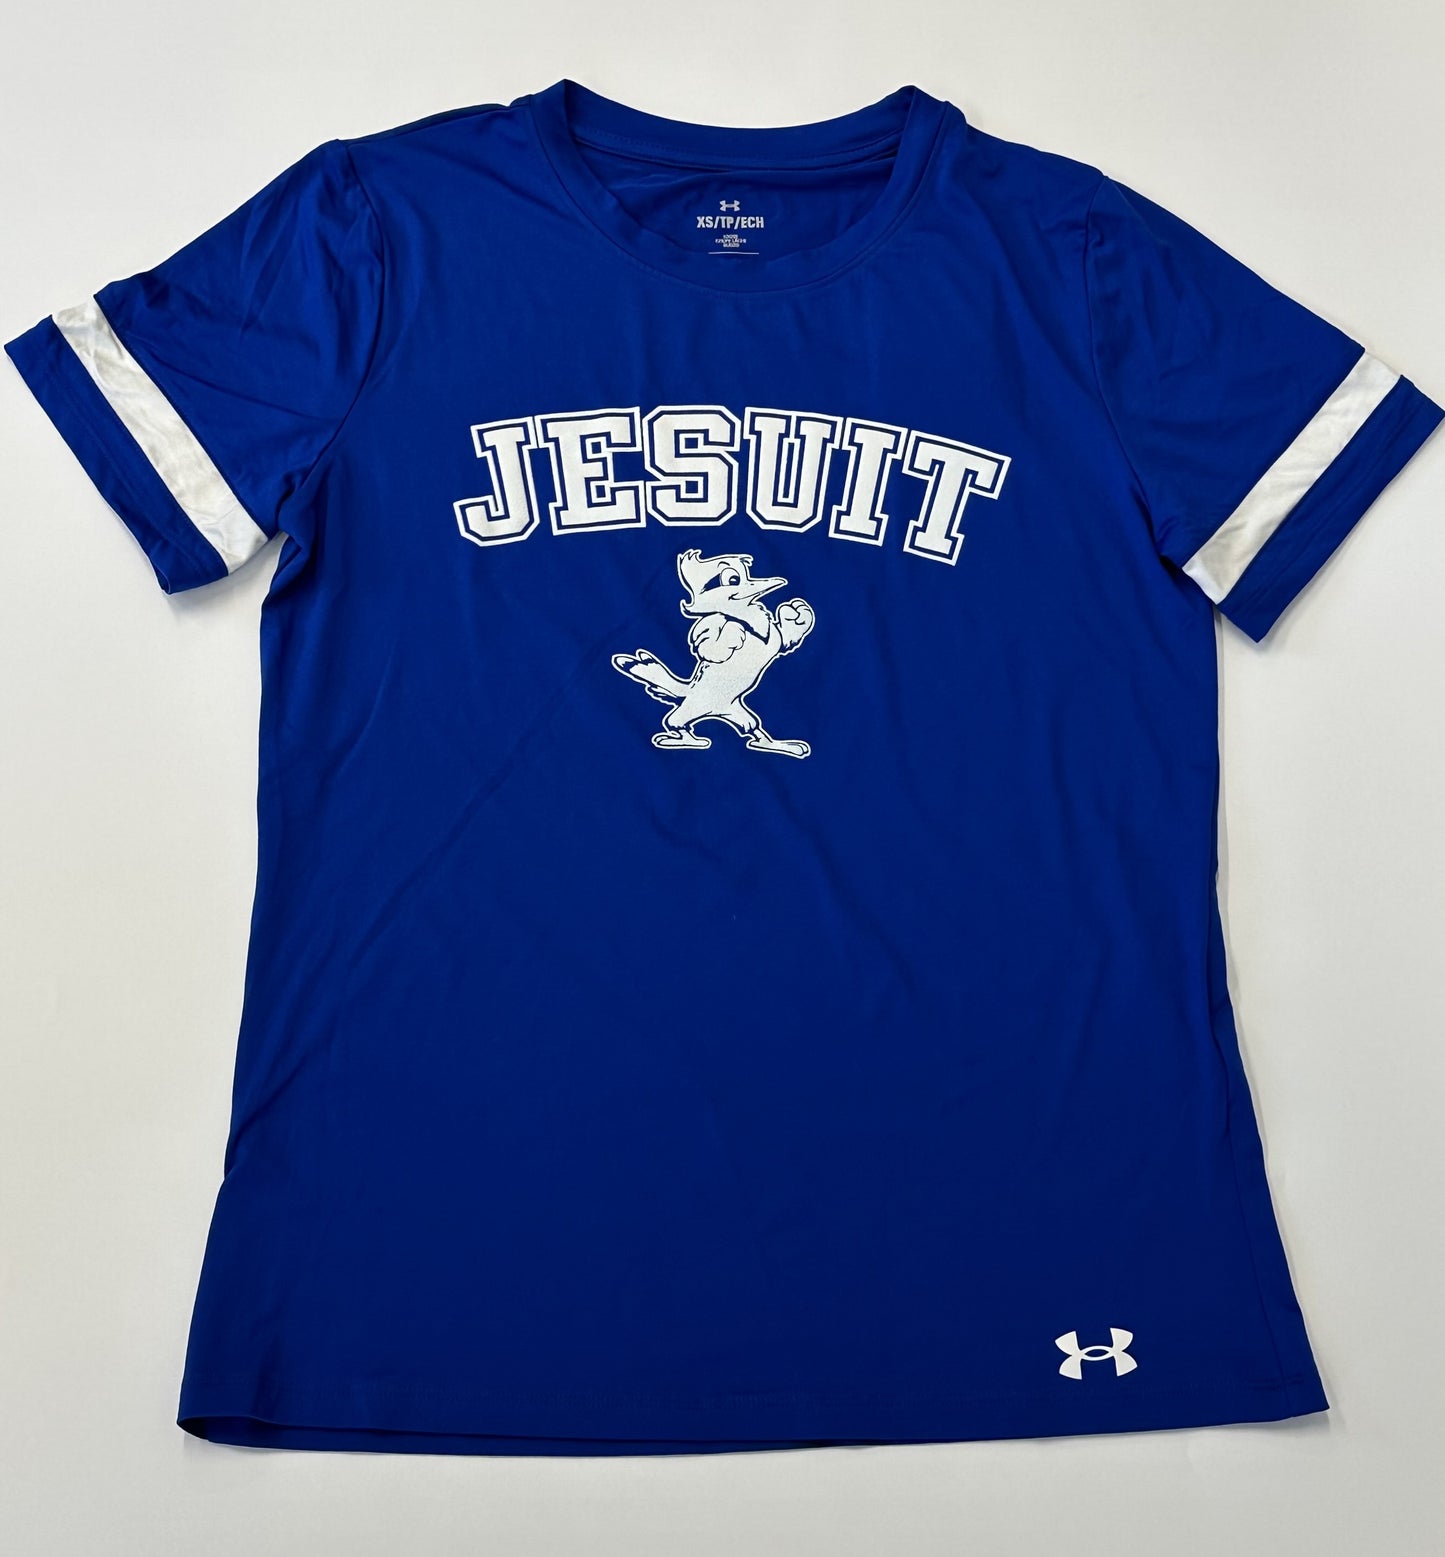 Under Armour.  90% Polyester/10% Elastane.  UA Tech fabric is quick-drying, ultra-soft & has a more natural feel. Set in sleeve construction with white blocked inset detail on sleeves.  JESUIT w/Jayson logo.